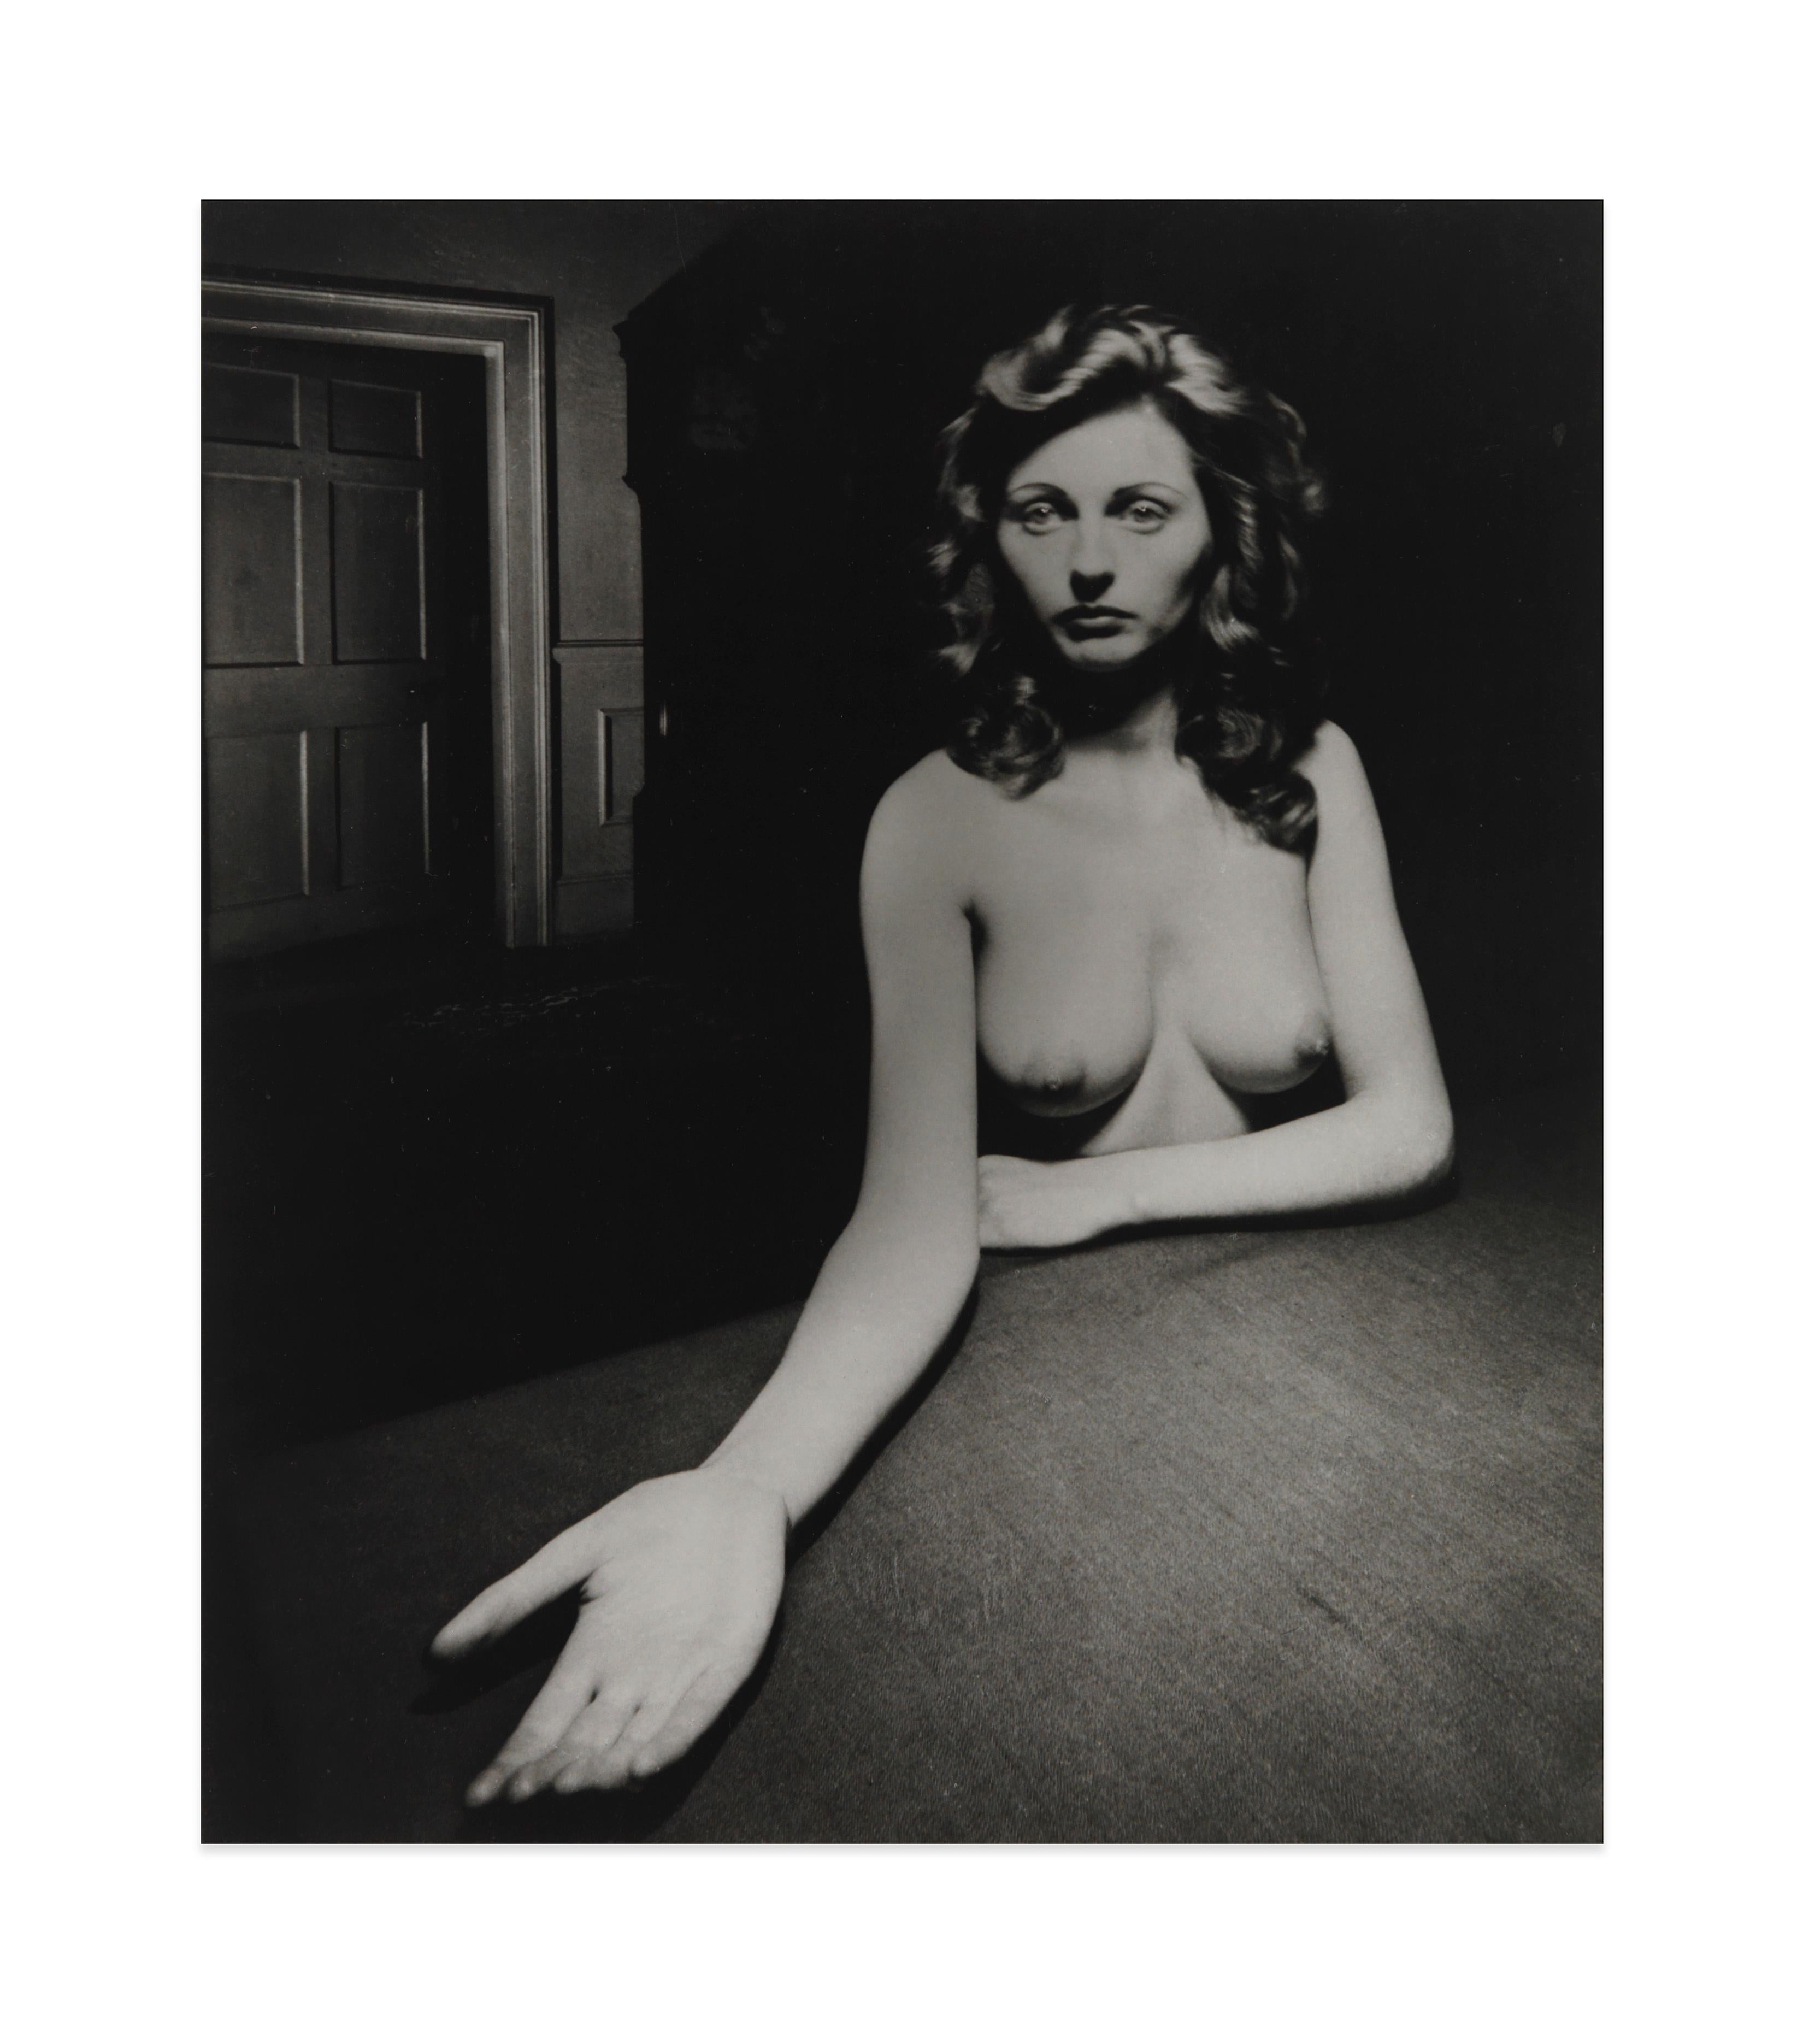 Nude, Micheldever, Hampshire - Photograph by Bill Brandt